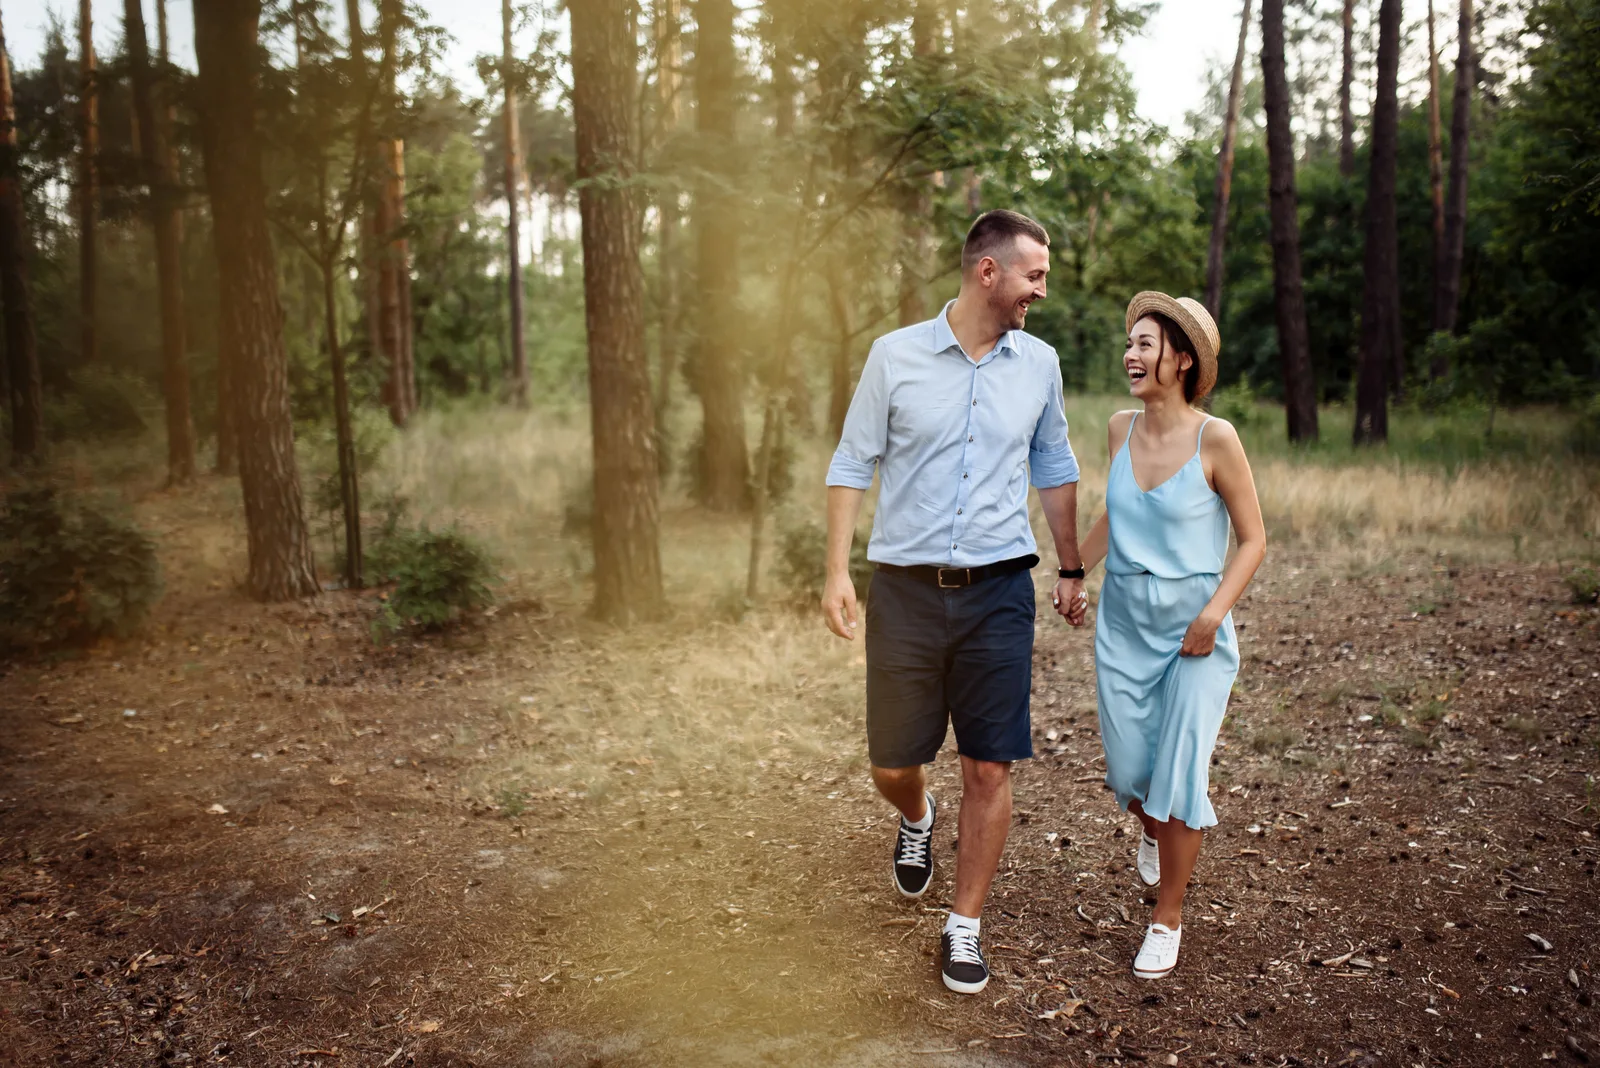 a smiling man and woman holding hands and walking through the park